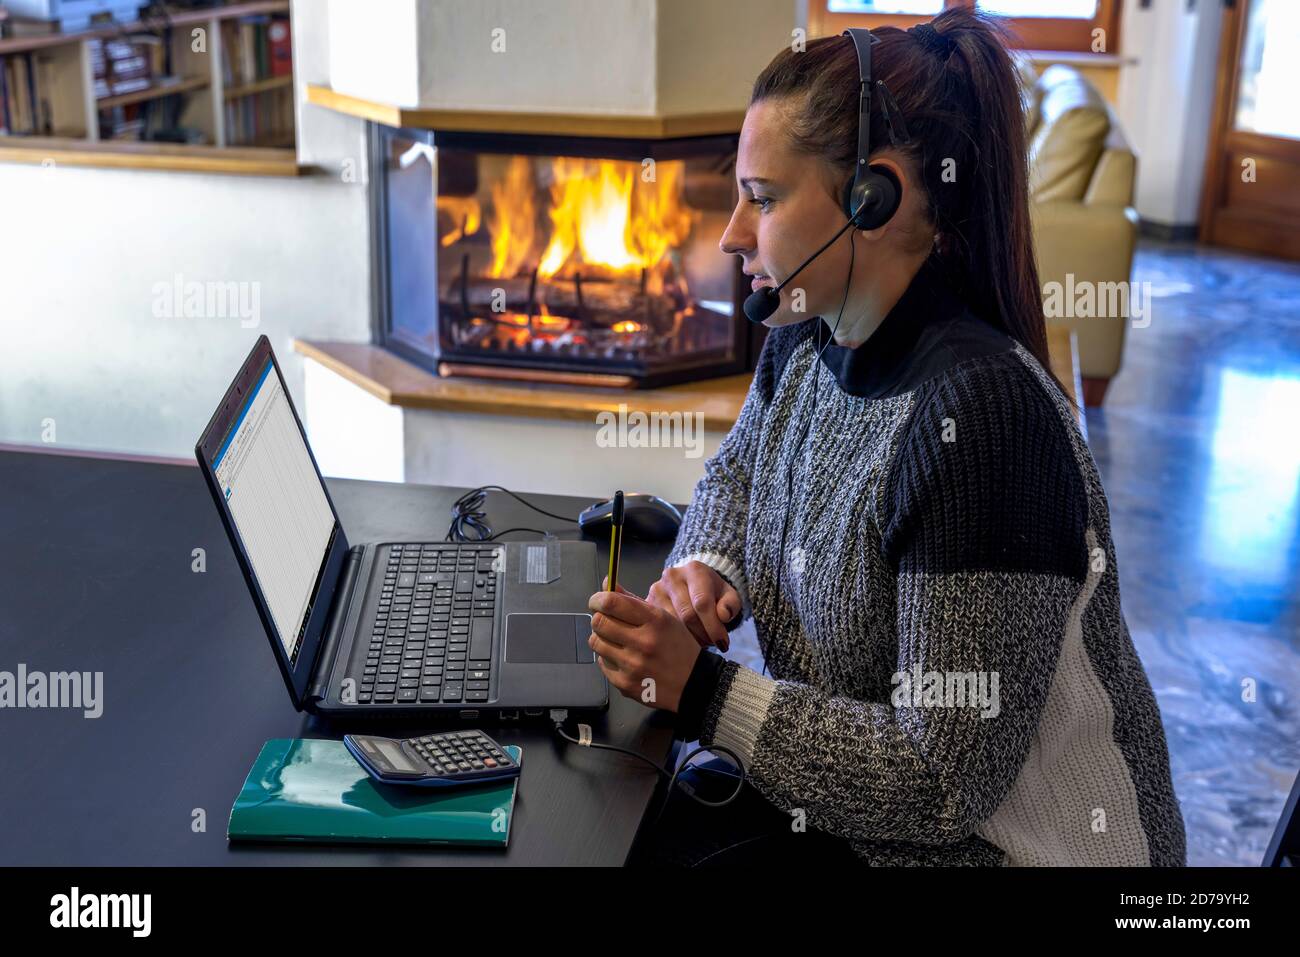 Smart working. Young woman working on laptop from home, during the Covid-19 health crisis Stock Photo